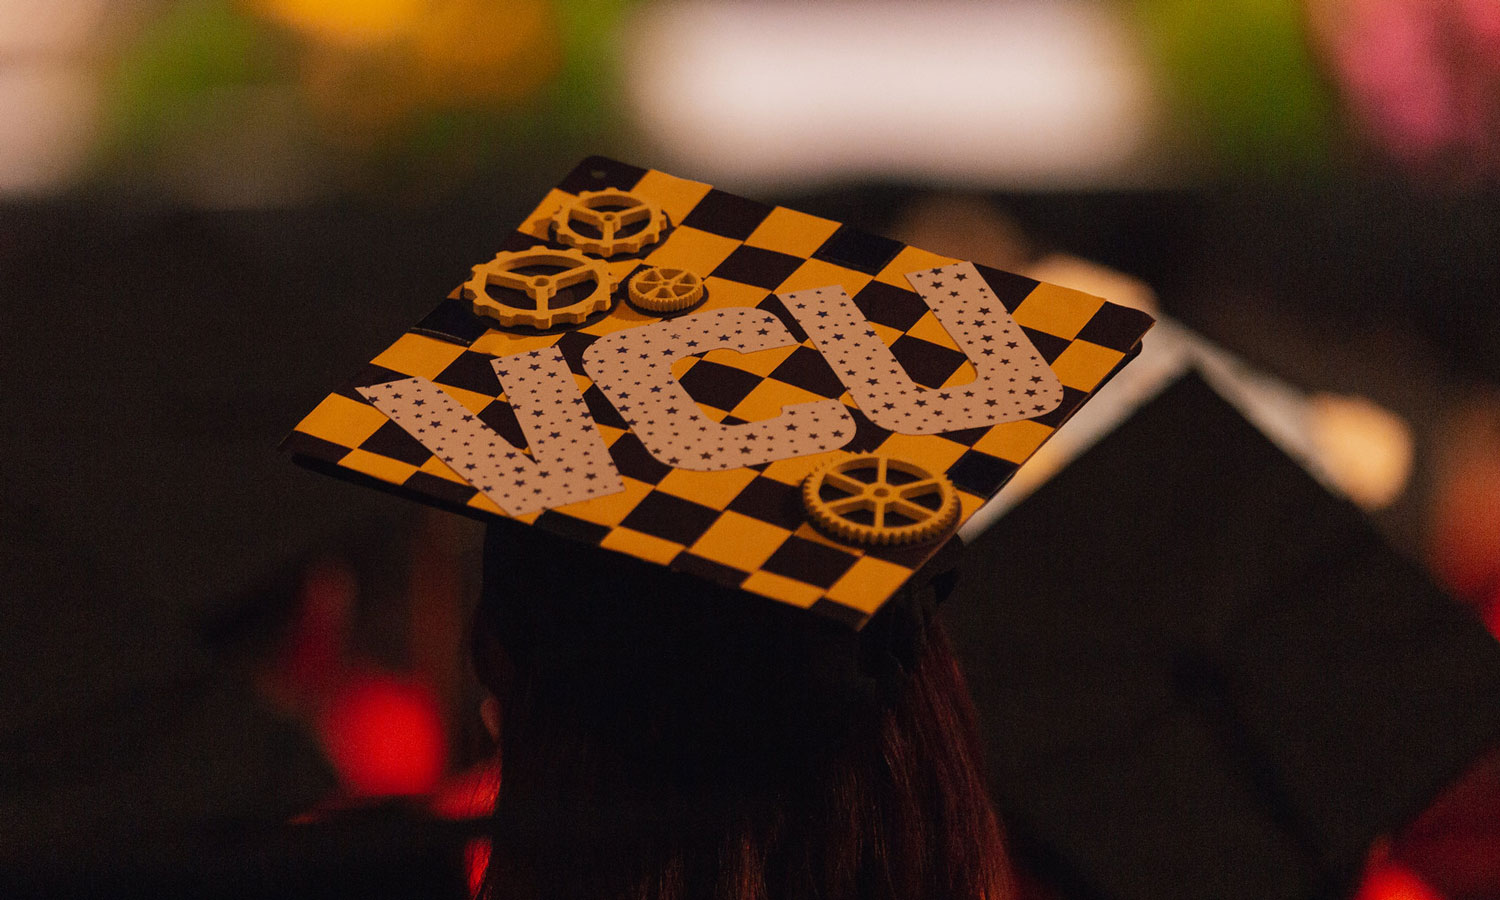 Student's graduation cap with VCU and gears on it